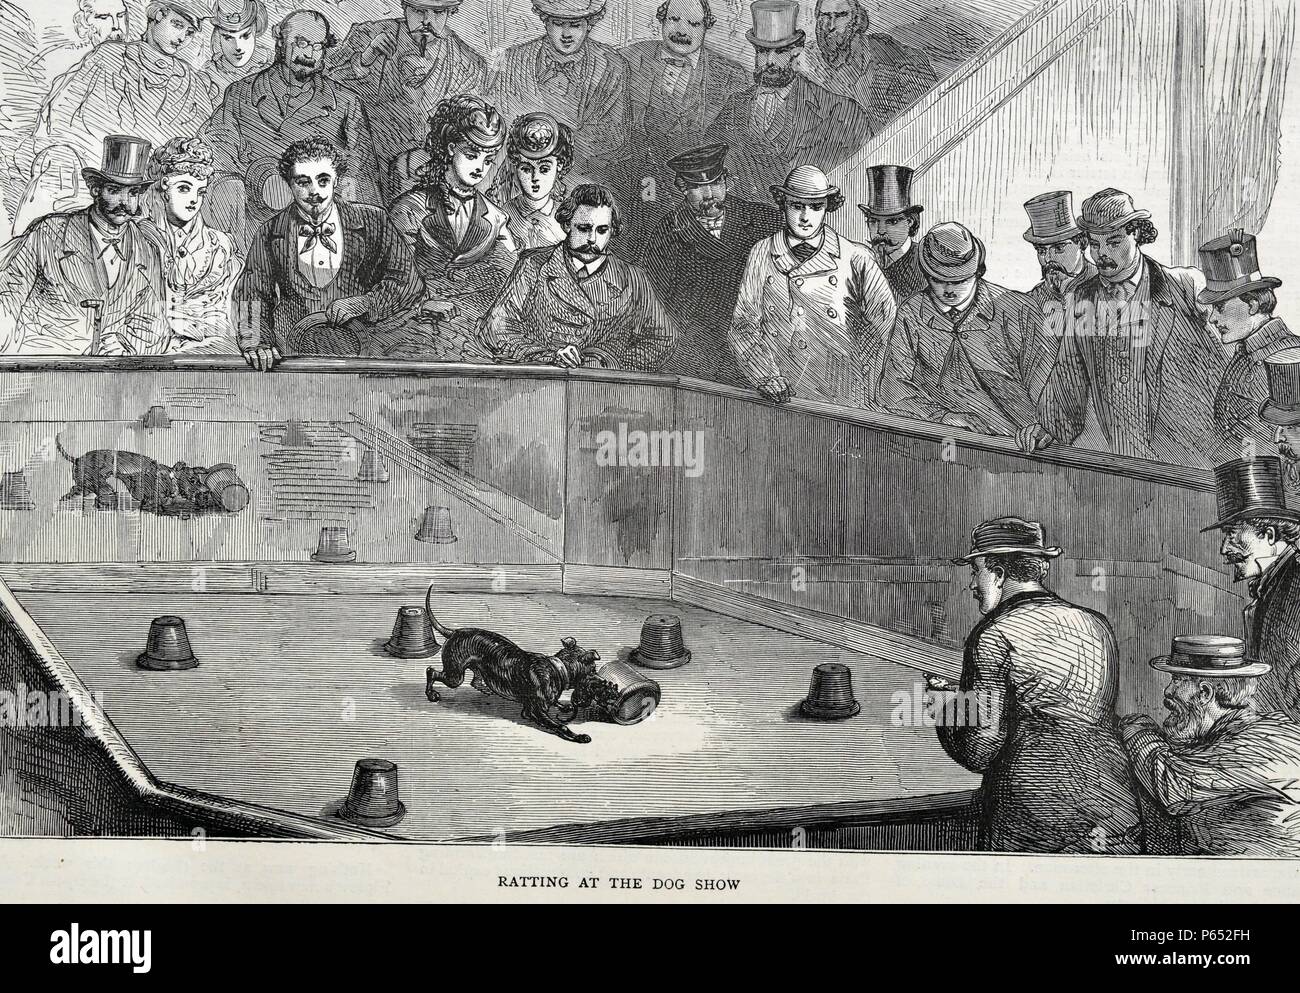 Engraving depicts a rat-baiting scene. Rat-baiting is a blood sport involving the baiting of rats in a pit. It was a popular sport until the beginning of the 20th century. Rat-baiting involved filling a pit with rats and then placing bets on how long it would take for a terrier to kill them all. Stock Photo